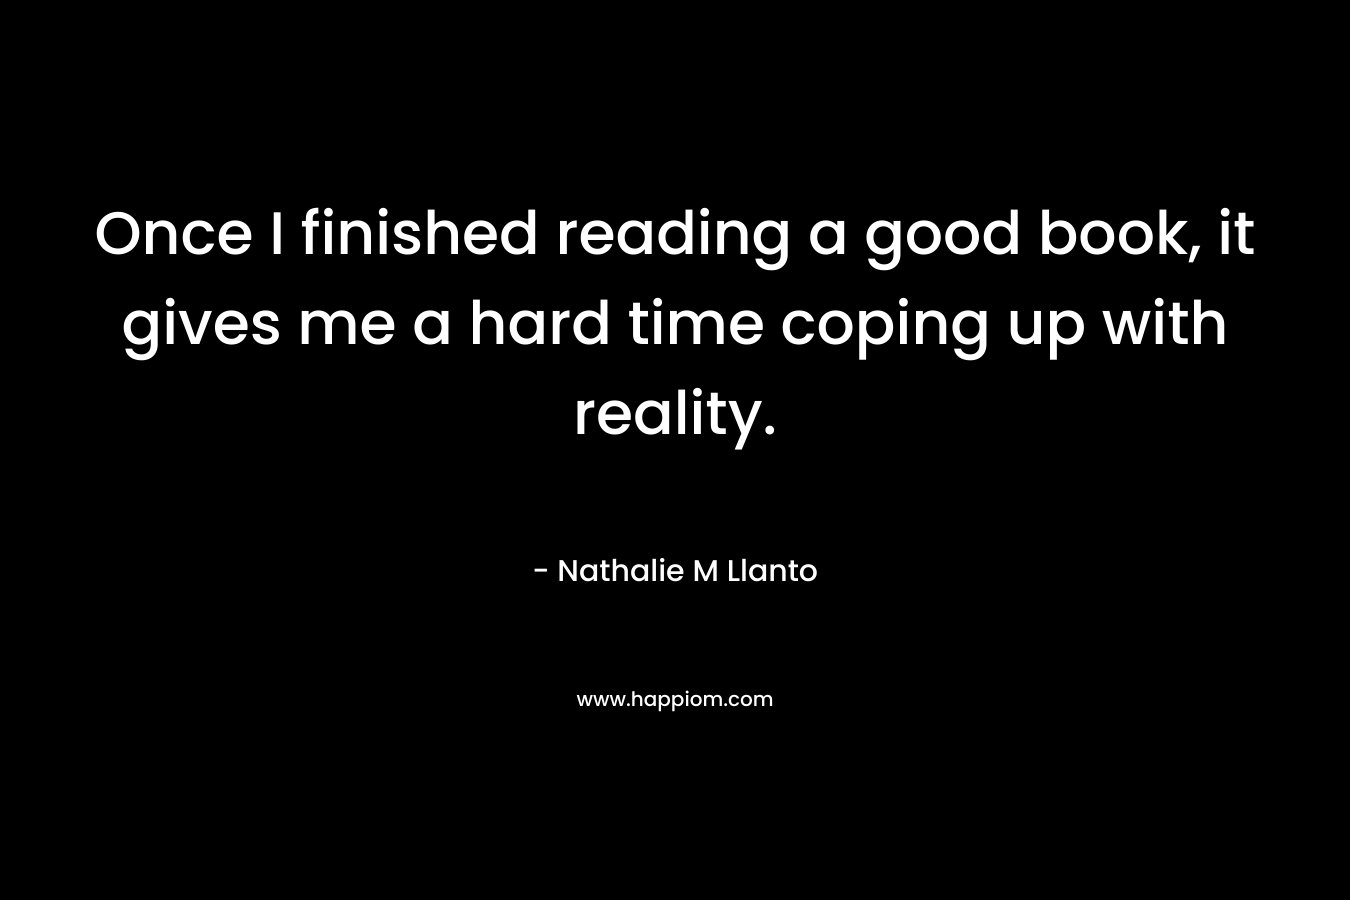 Once I finished reading a good book, it gives me a hard time coping up with reality.